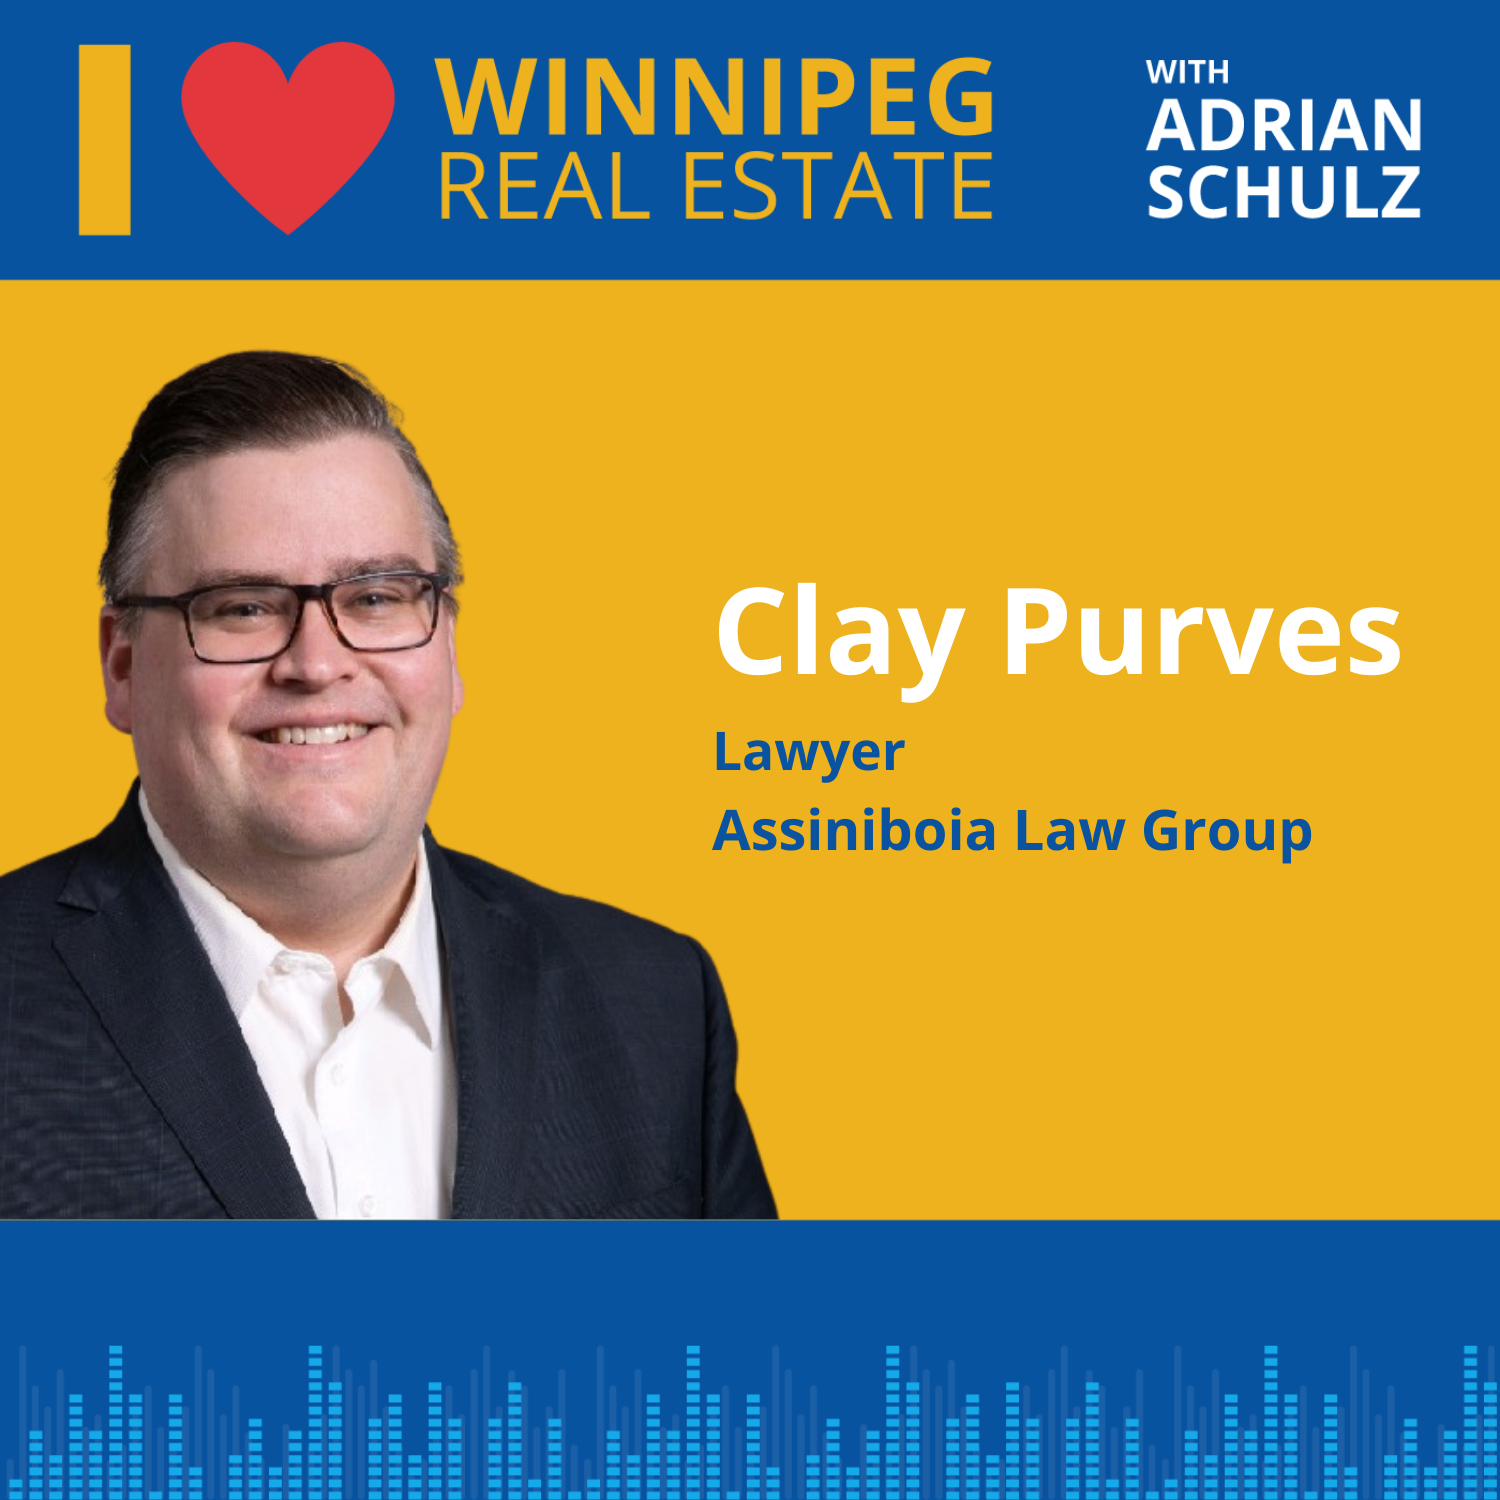 Clay Purves on how a separation or divorce affects the home Image